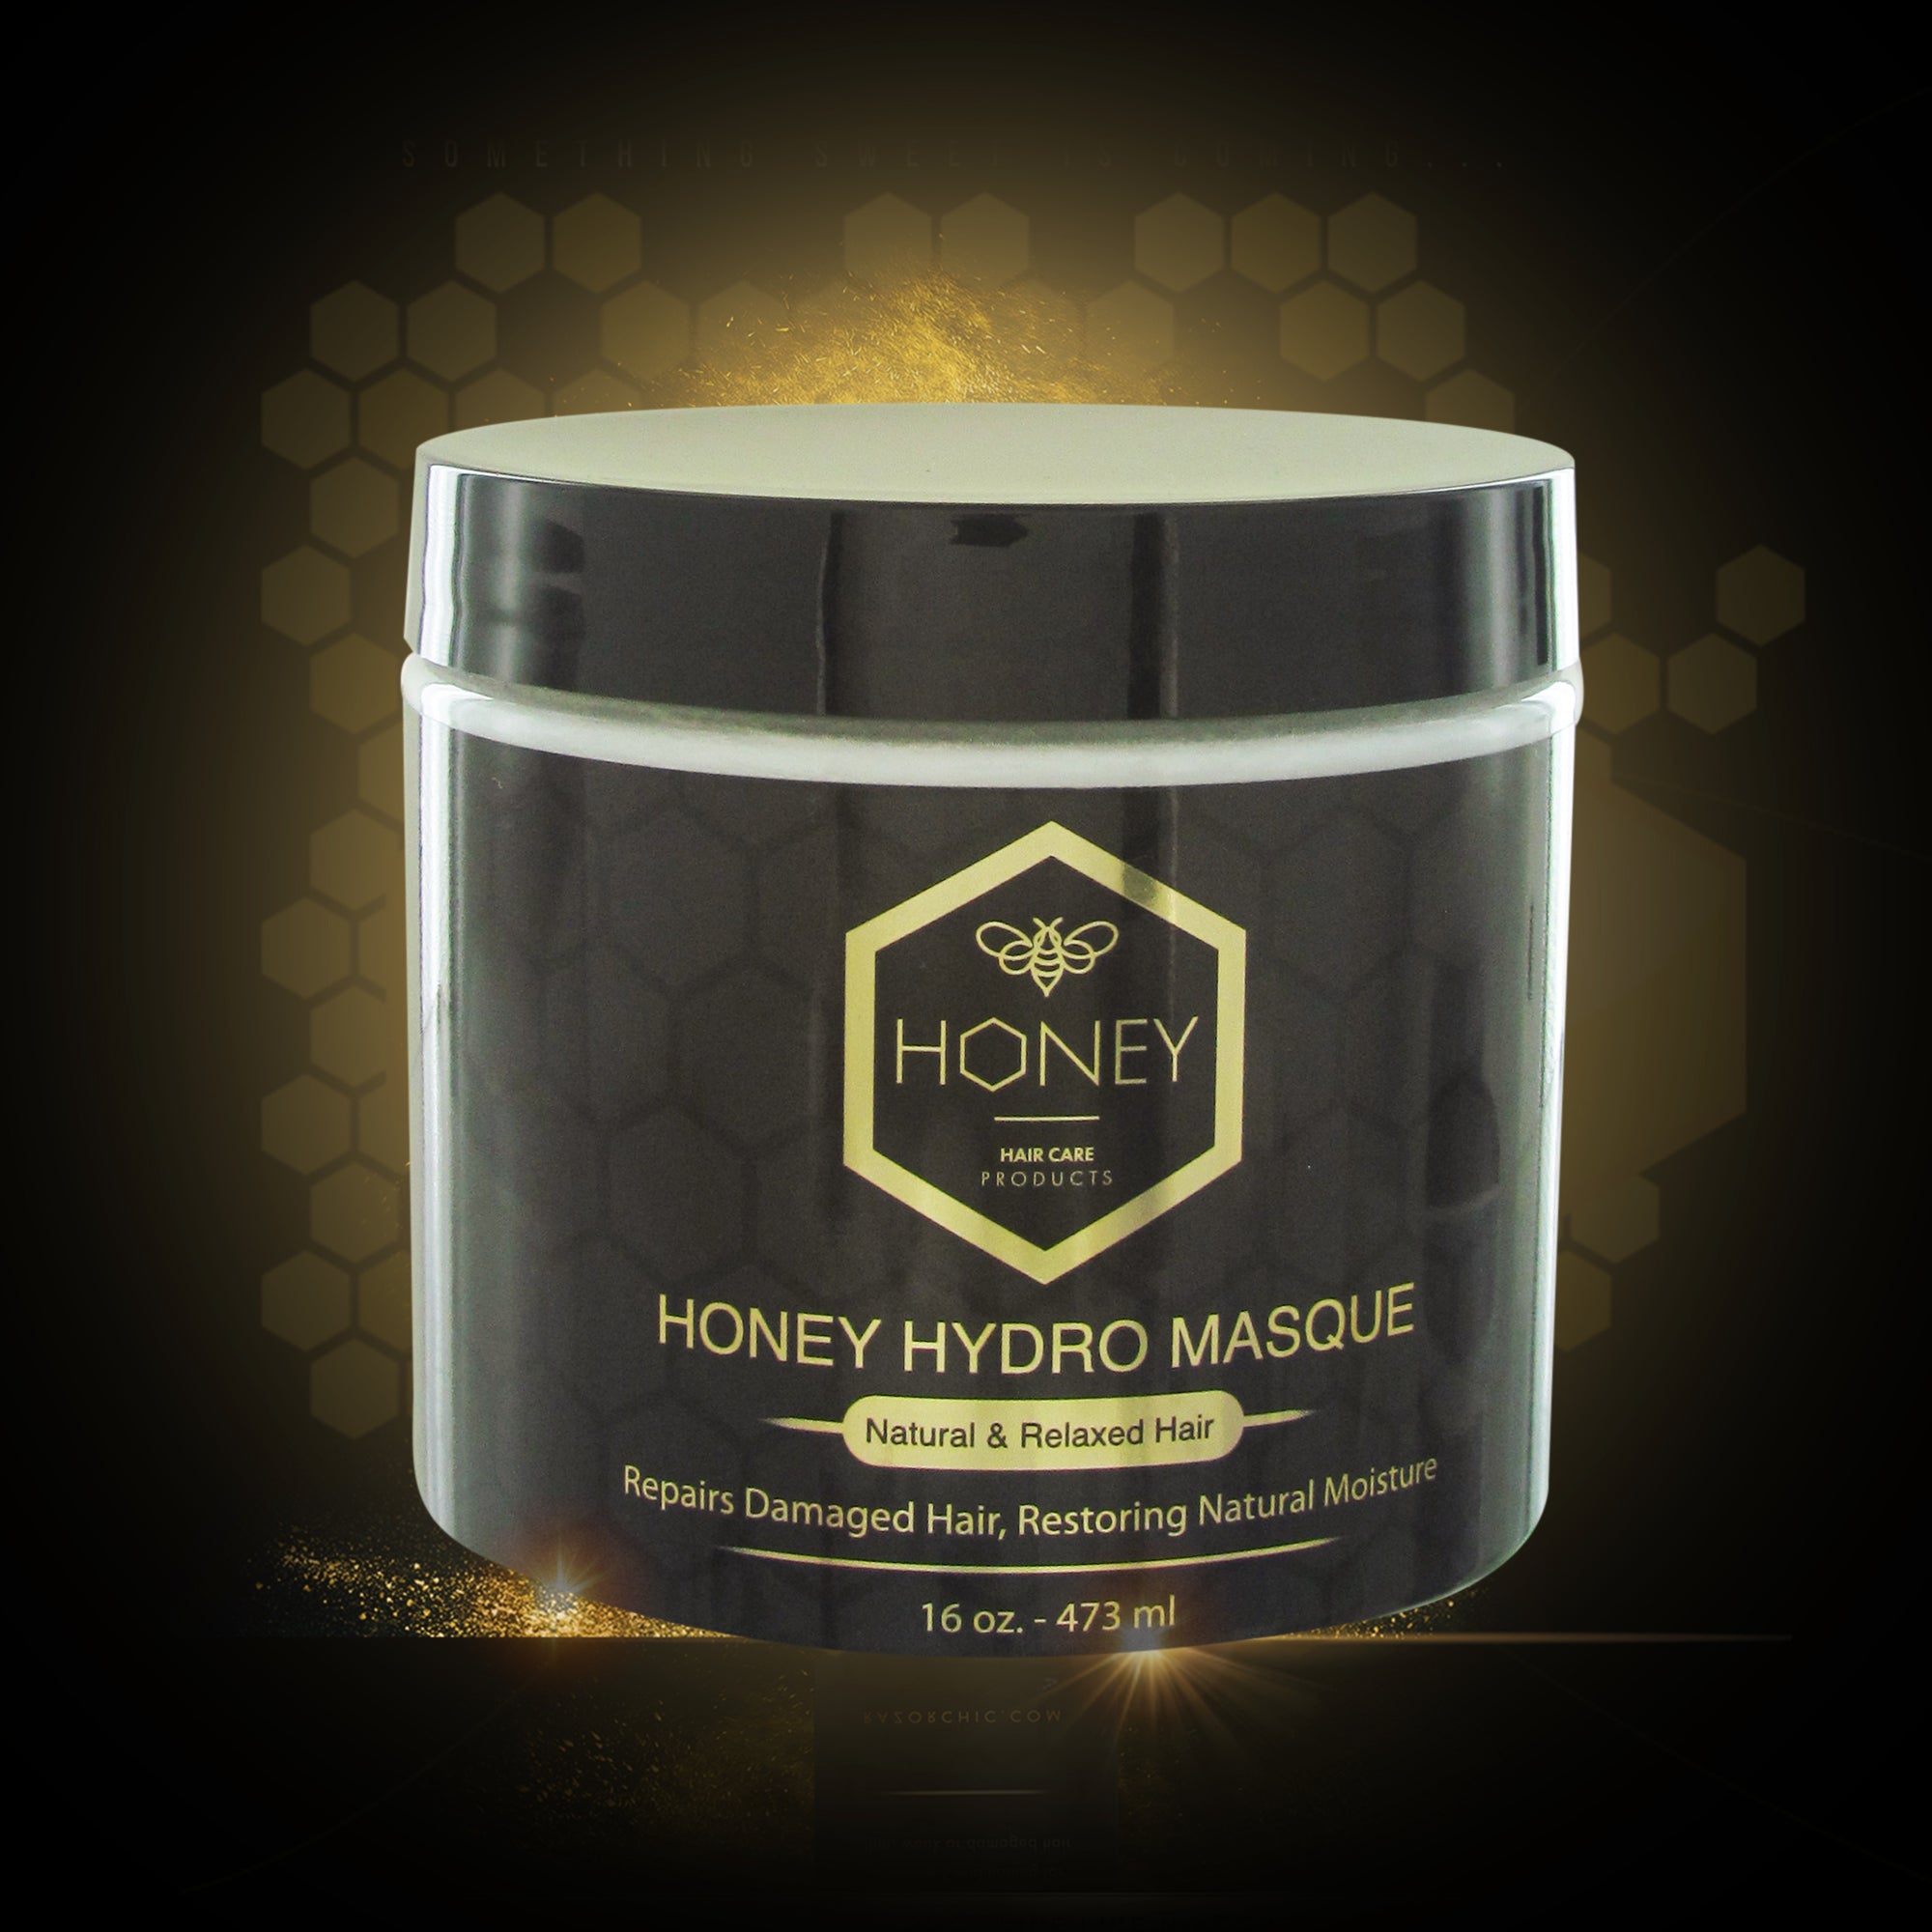 Honey Hydro Masque (16 oz) for Dry Damaged Hair - Helps Repair Damaged Hair, Split Ends, Hair Loss and Breakage